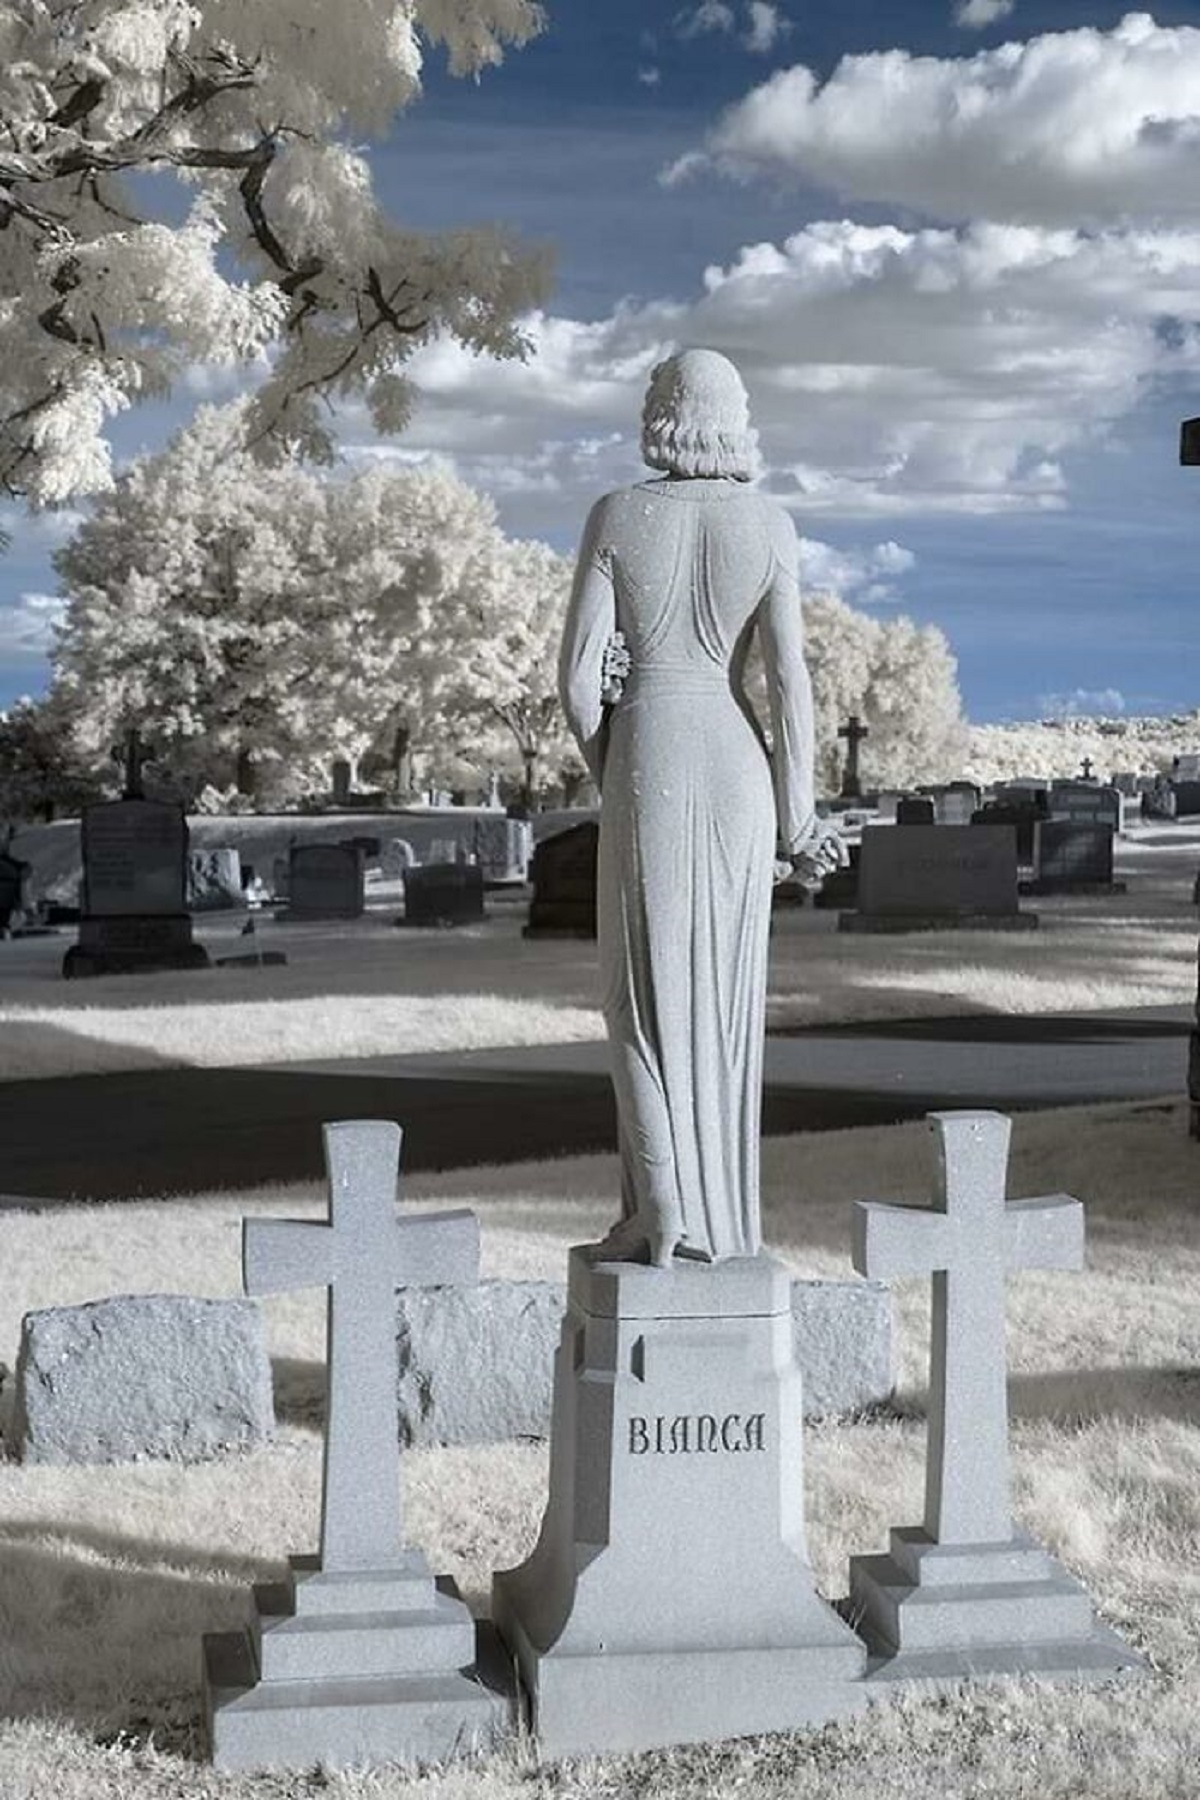 The mysterious Bianca Deconciliis. A life size statue of a young woman who died at 20 in 1942. Calvary Cemetery, Pittsburgh, PA.